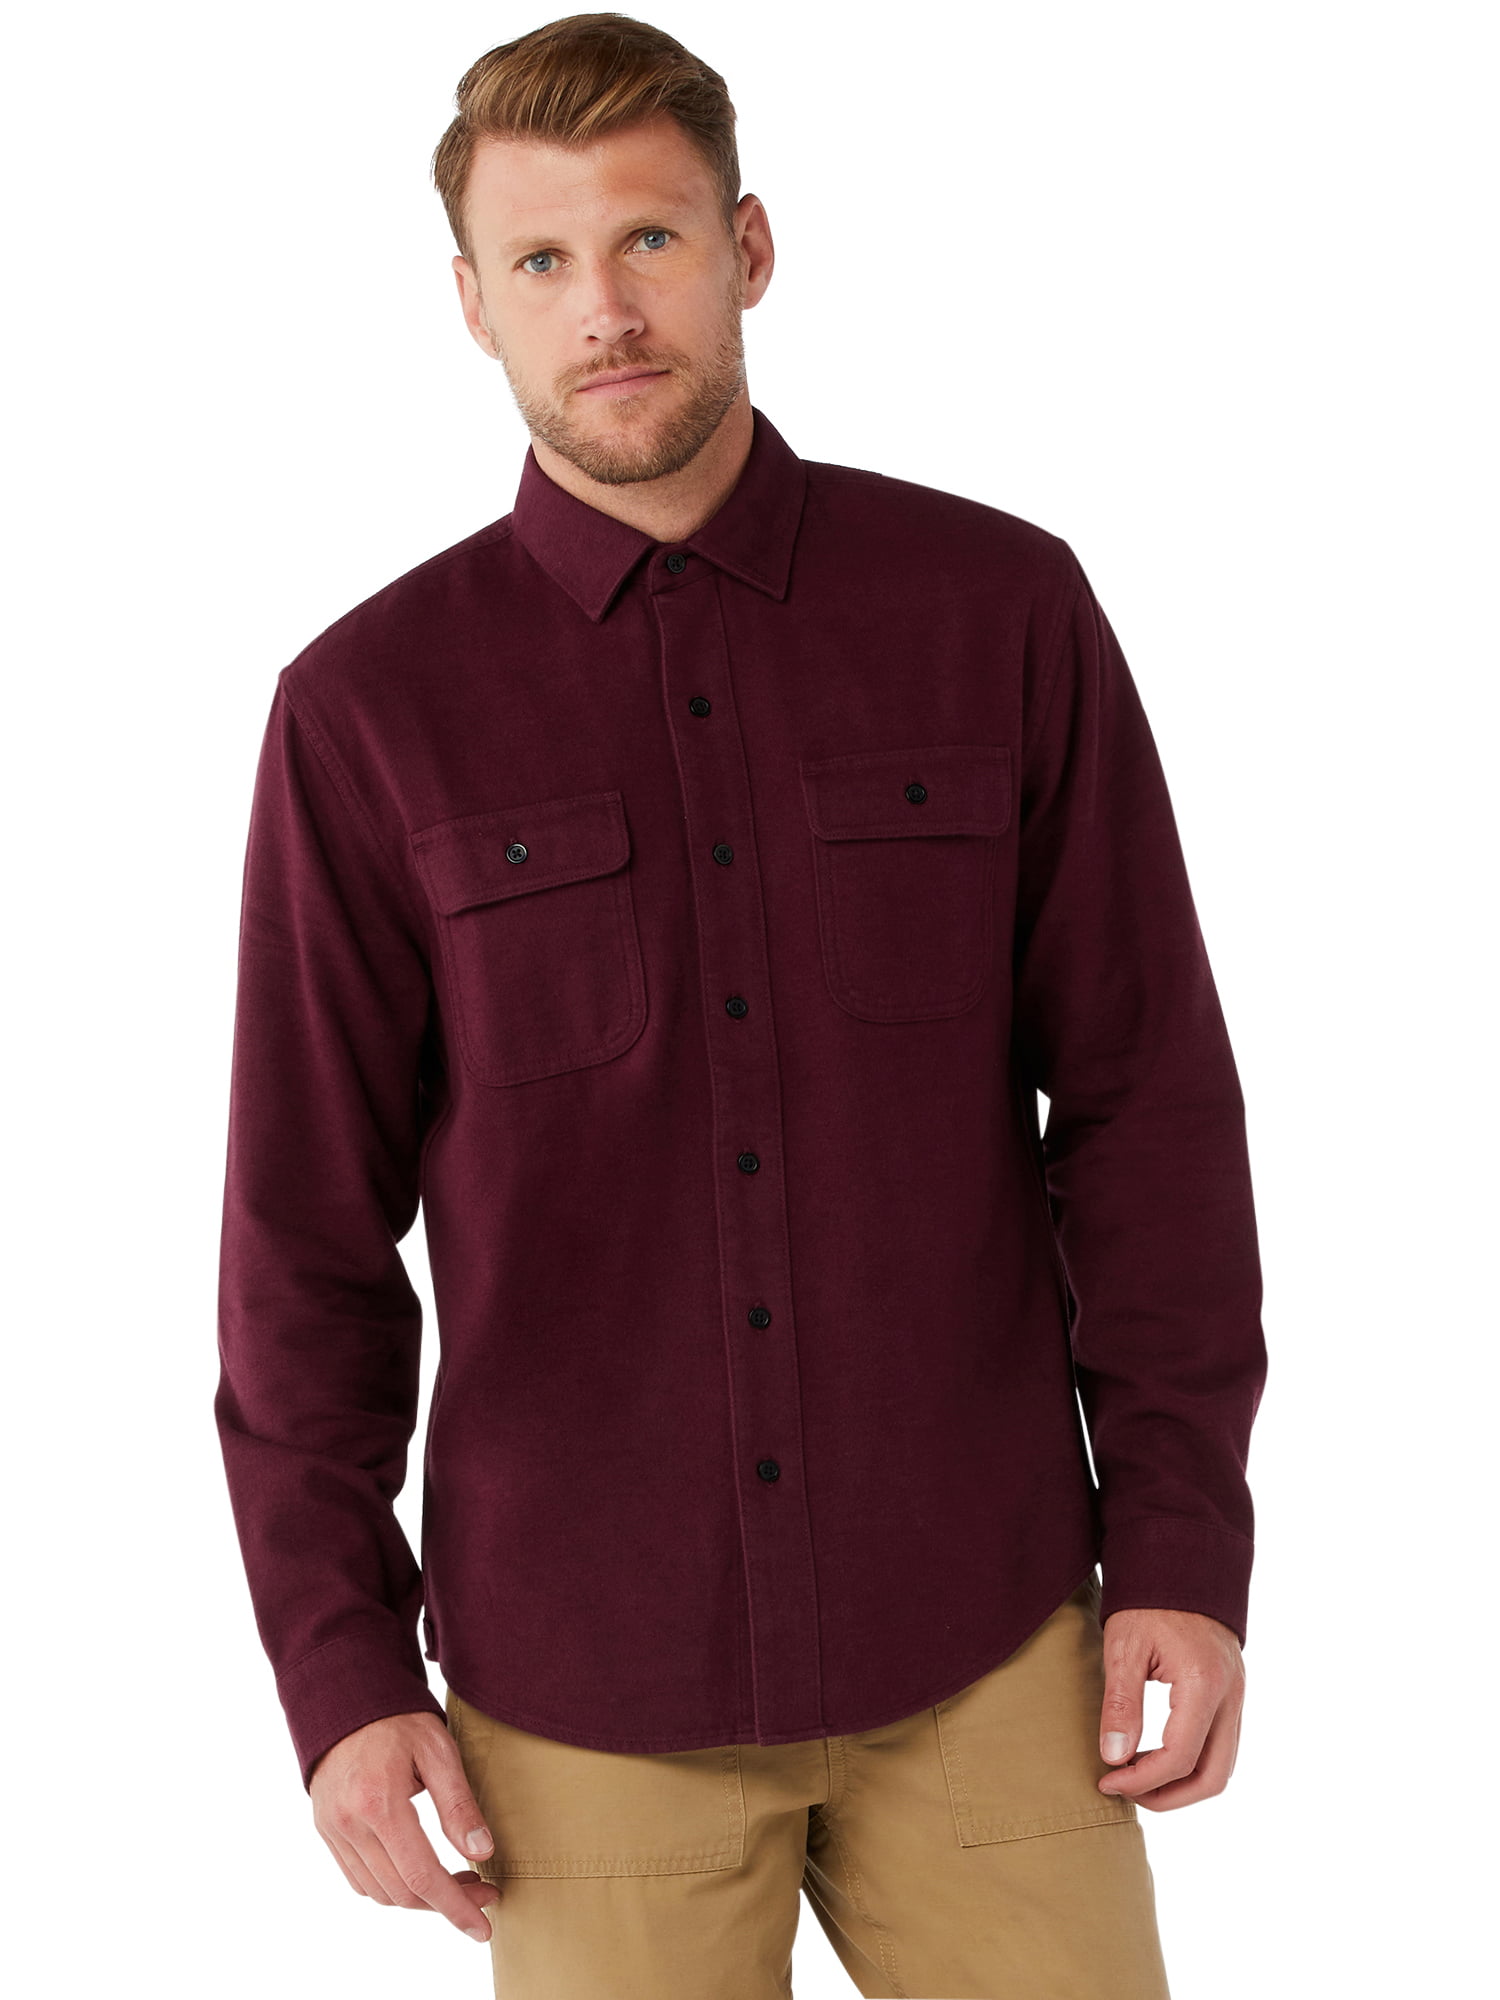 Free Assembly Relaxed fit Pockets Long Sleeve Shirt (Men's) - Walmart.com